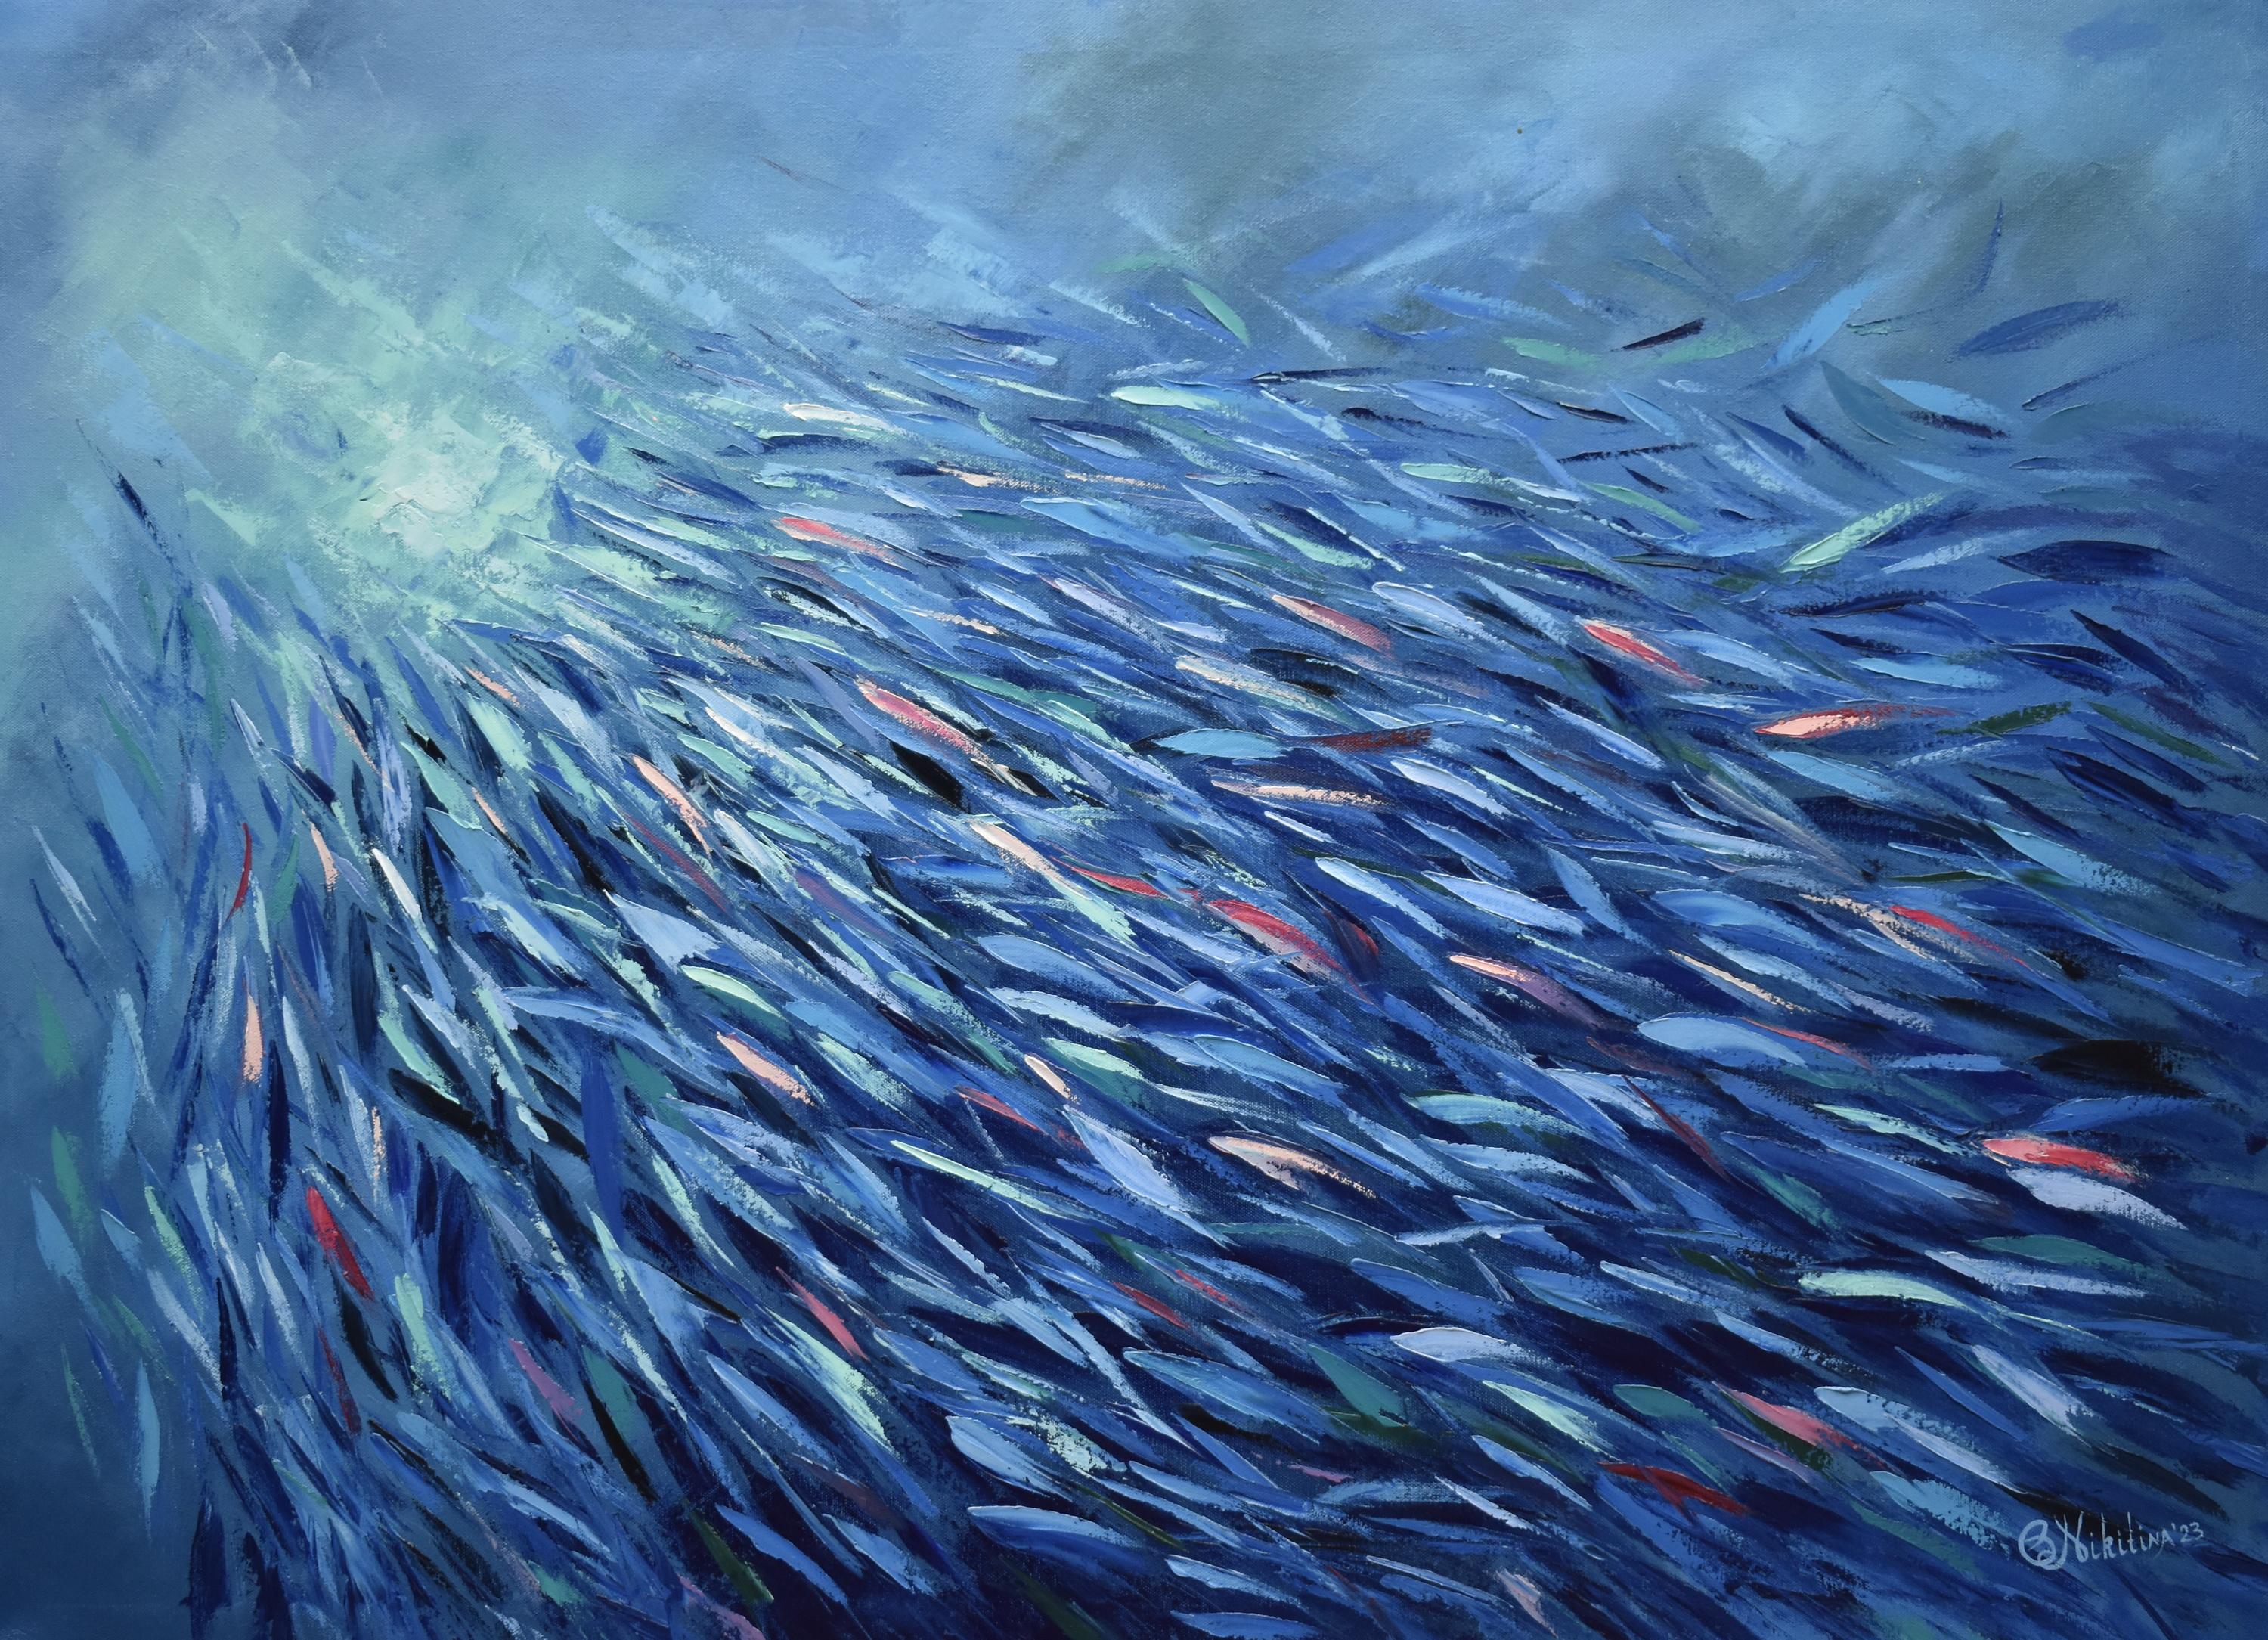 Blue Fish Sardines Painting Ocean Art Underwater World
Materials: rolled canvas, oil painting, palette knifes
Artist draw her inspiration from interaction with underwater world while scuba diving. 
School of Fish art are invisible in the shadow and